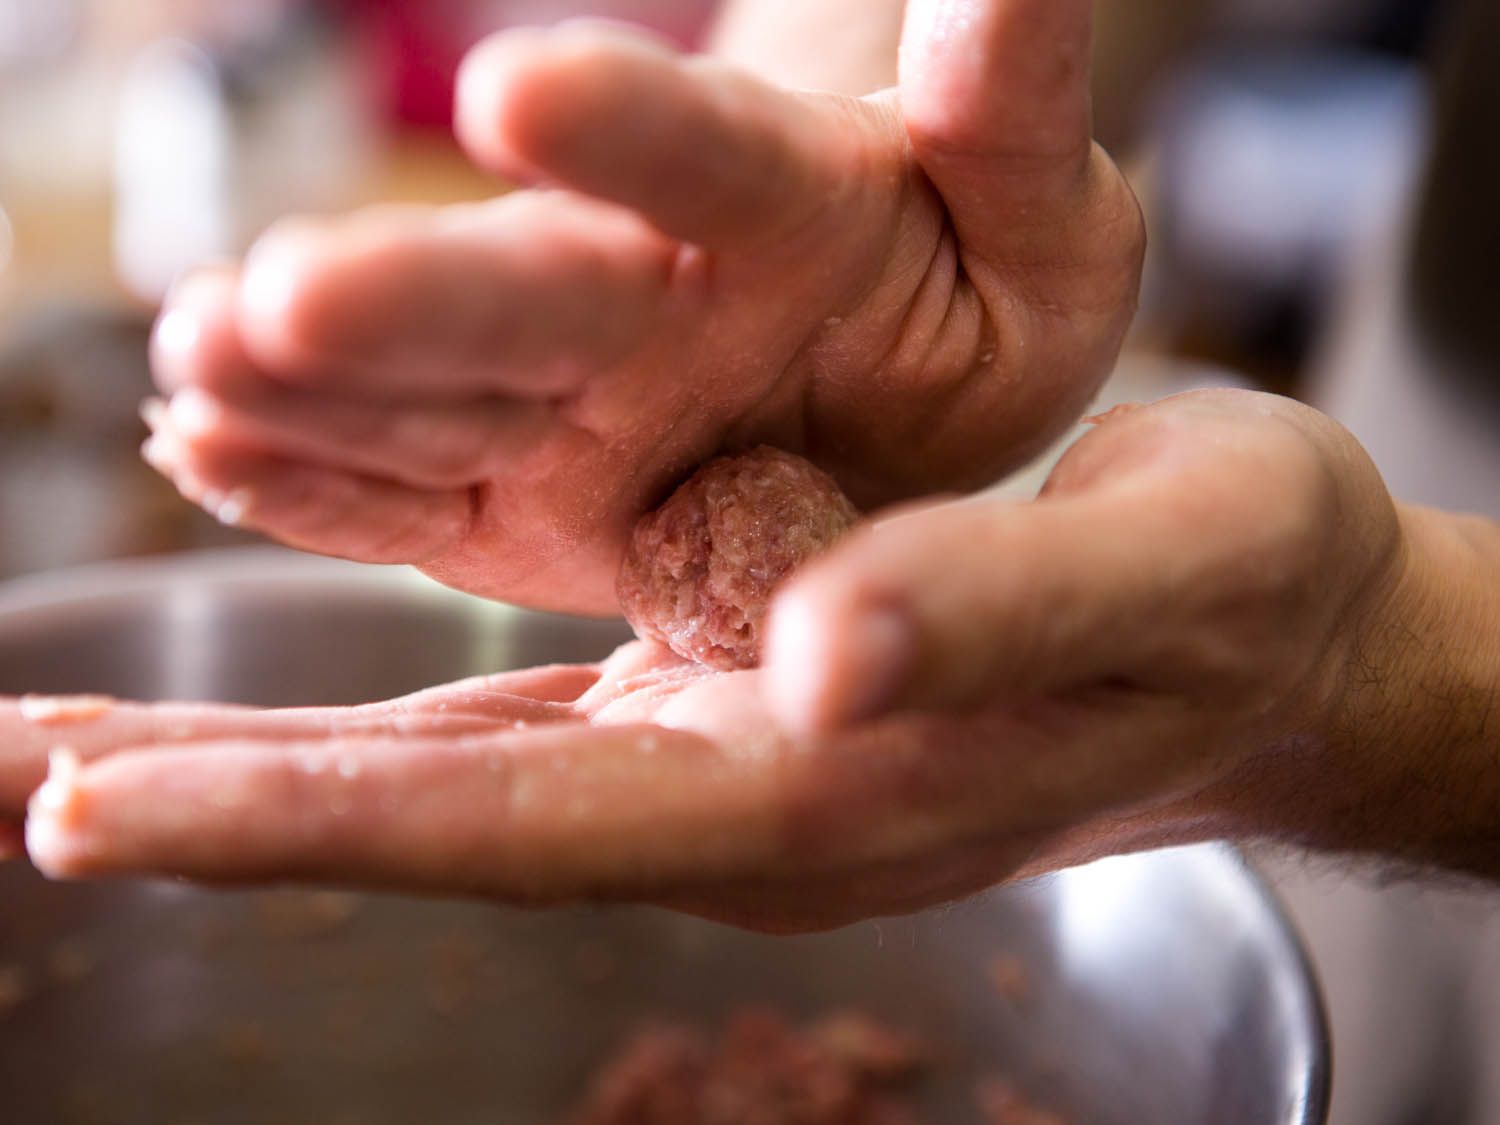 Rolling a raw meat mixture between palms to form a Swedish meatballs.